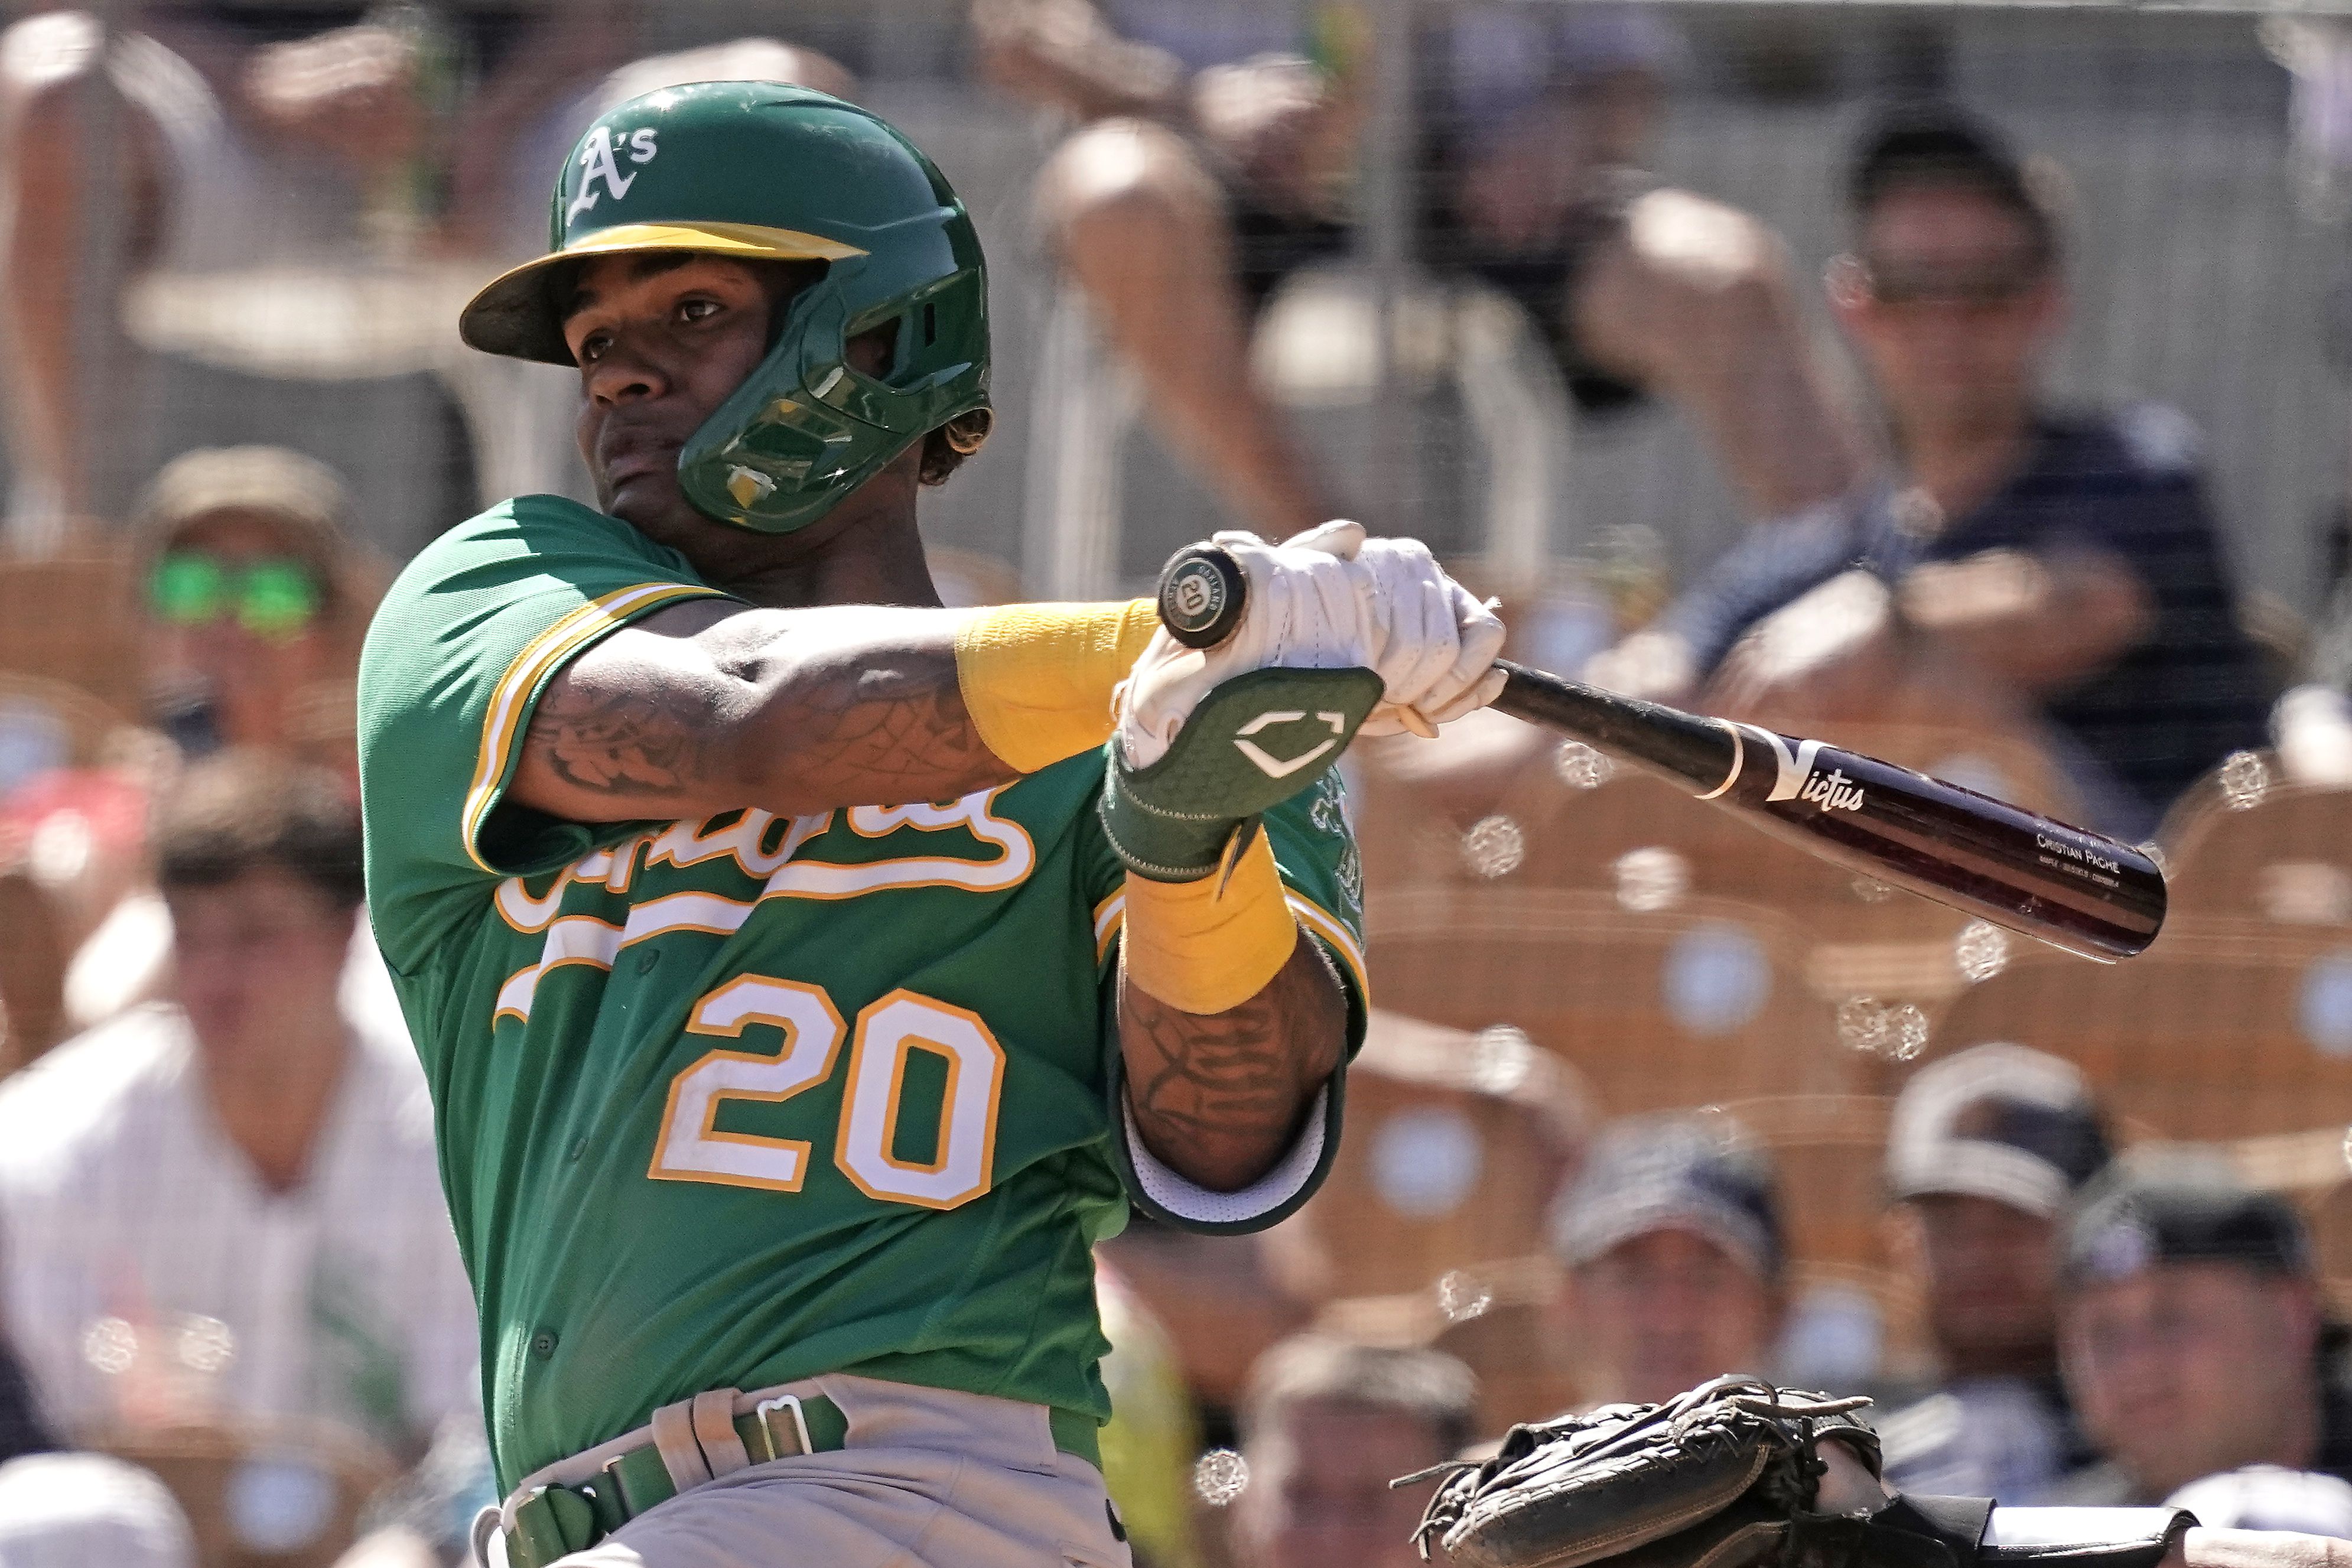 Why did the A's give up on Cristian Pache?